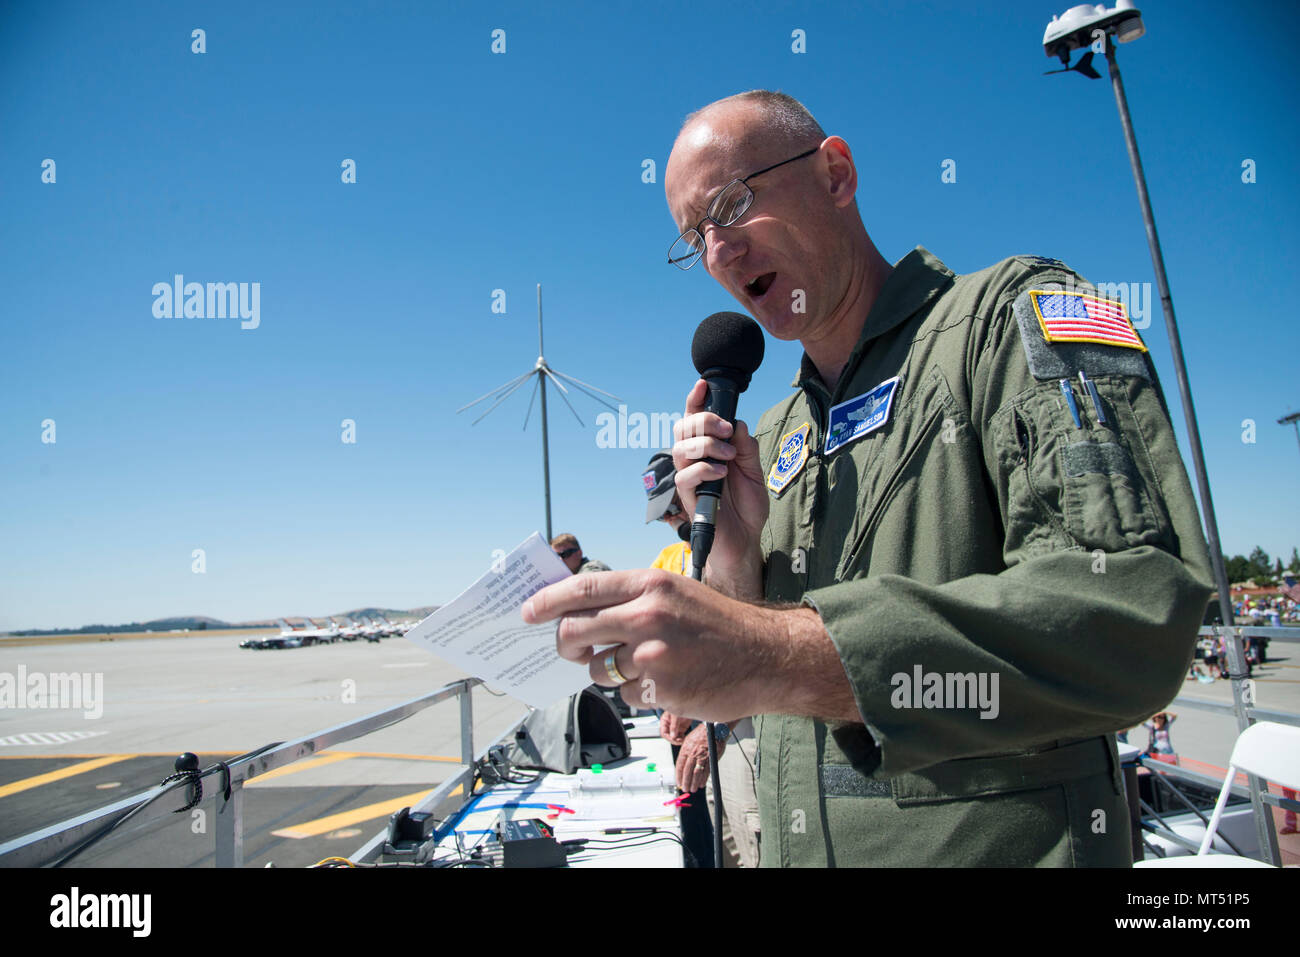 Col. Ryan Samuelson, 92nd Air Refueling Wing commander, thanked service members and members of the local community for their support during the SkyFest 2017 Air Show and Open House at Fairchild Air Force Base, Washington. SkyFest was hosted to thank the local and regional community for their support and give them the opportunity to meet Airmen and learn about the Air Force mission. (U.S. Air Force photo/Senior Airman Janelle Patiño) Stock Photo